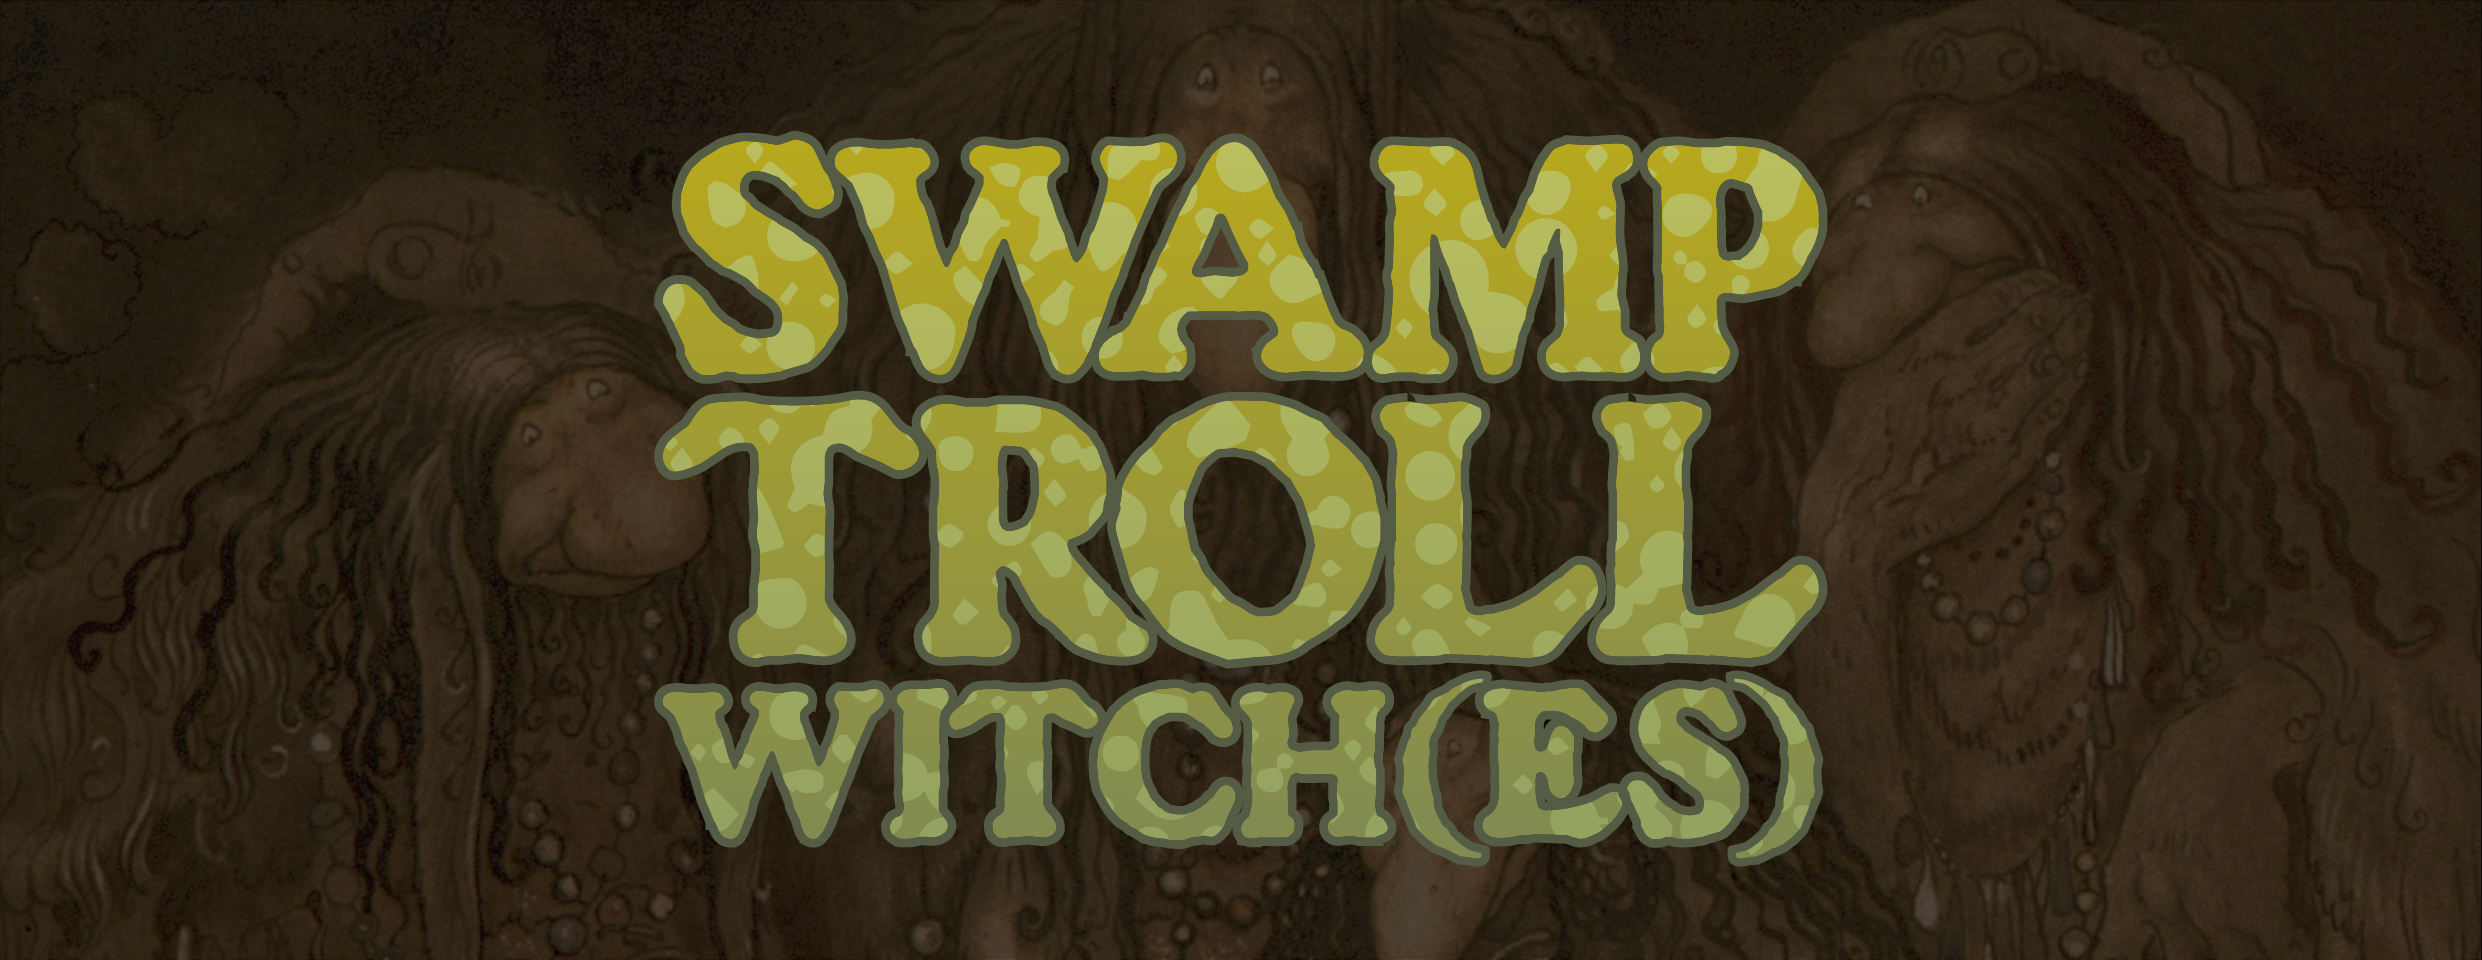 Swamp Troll Witch(es) - REMASTER AVAILABLE NOW